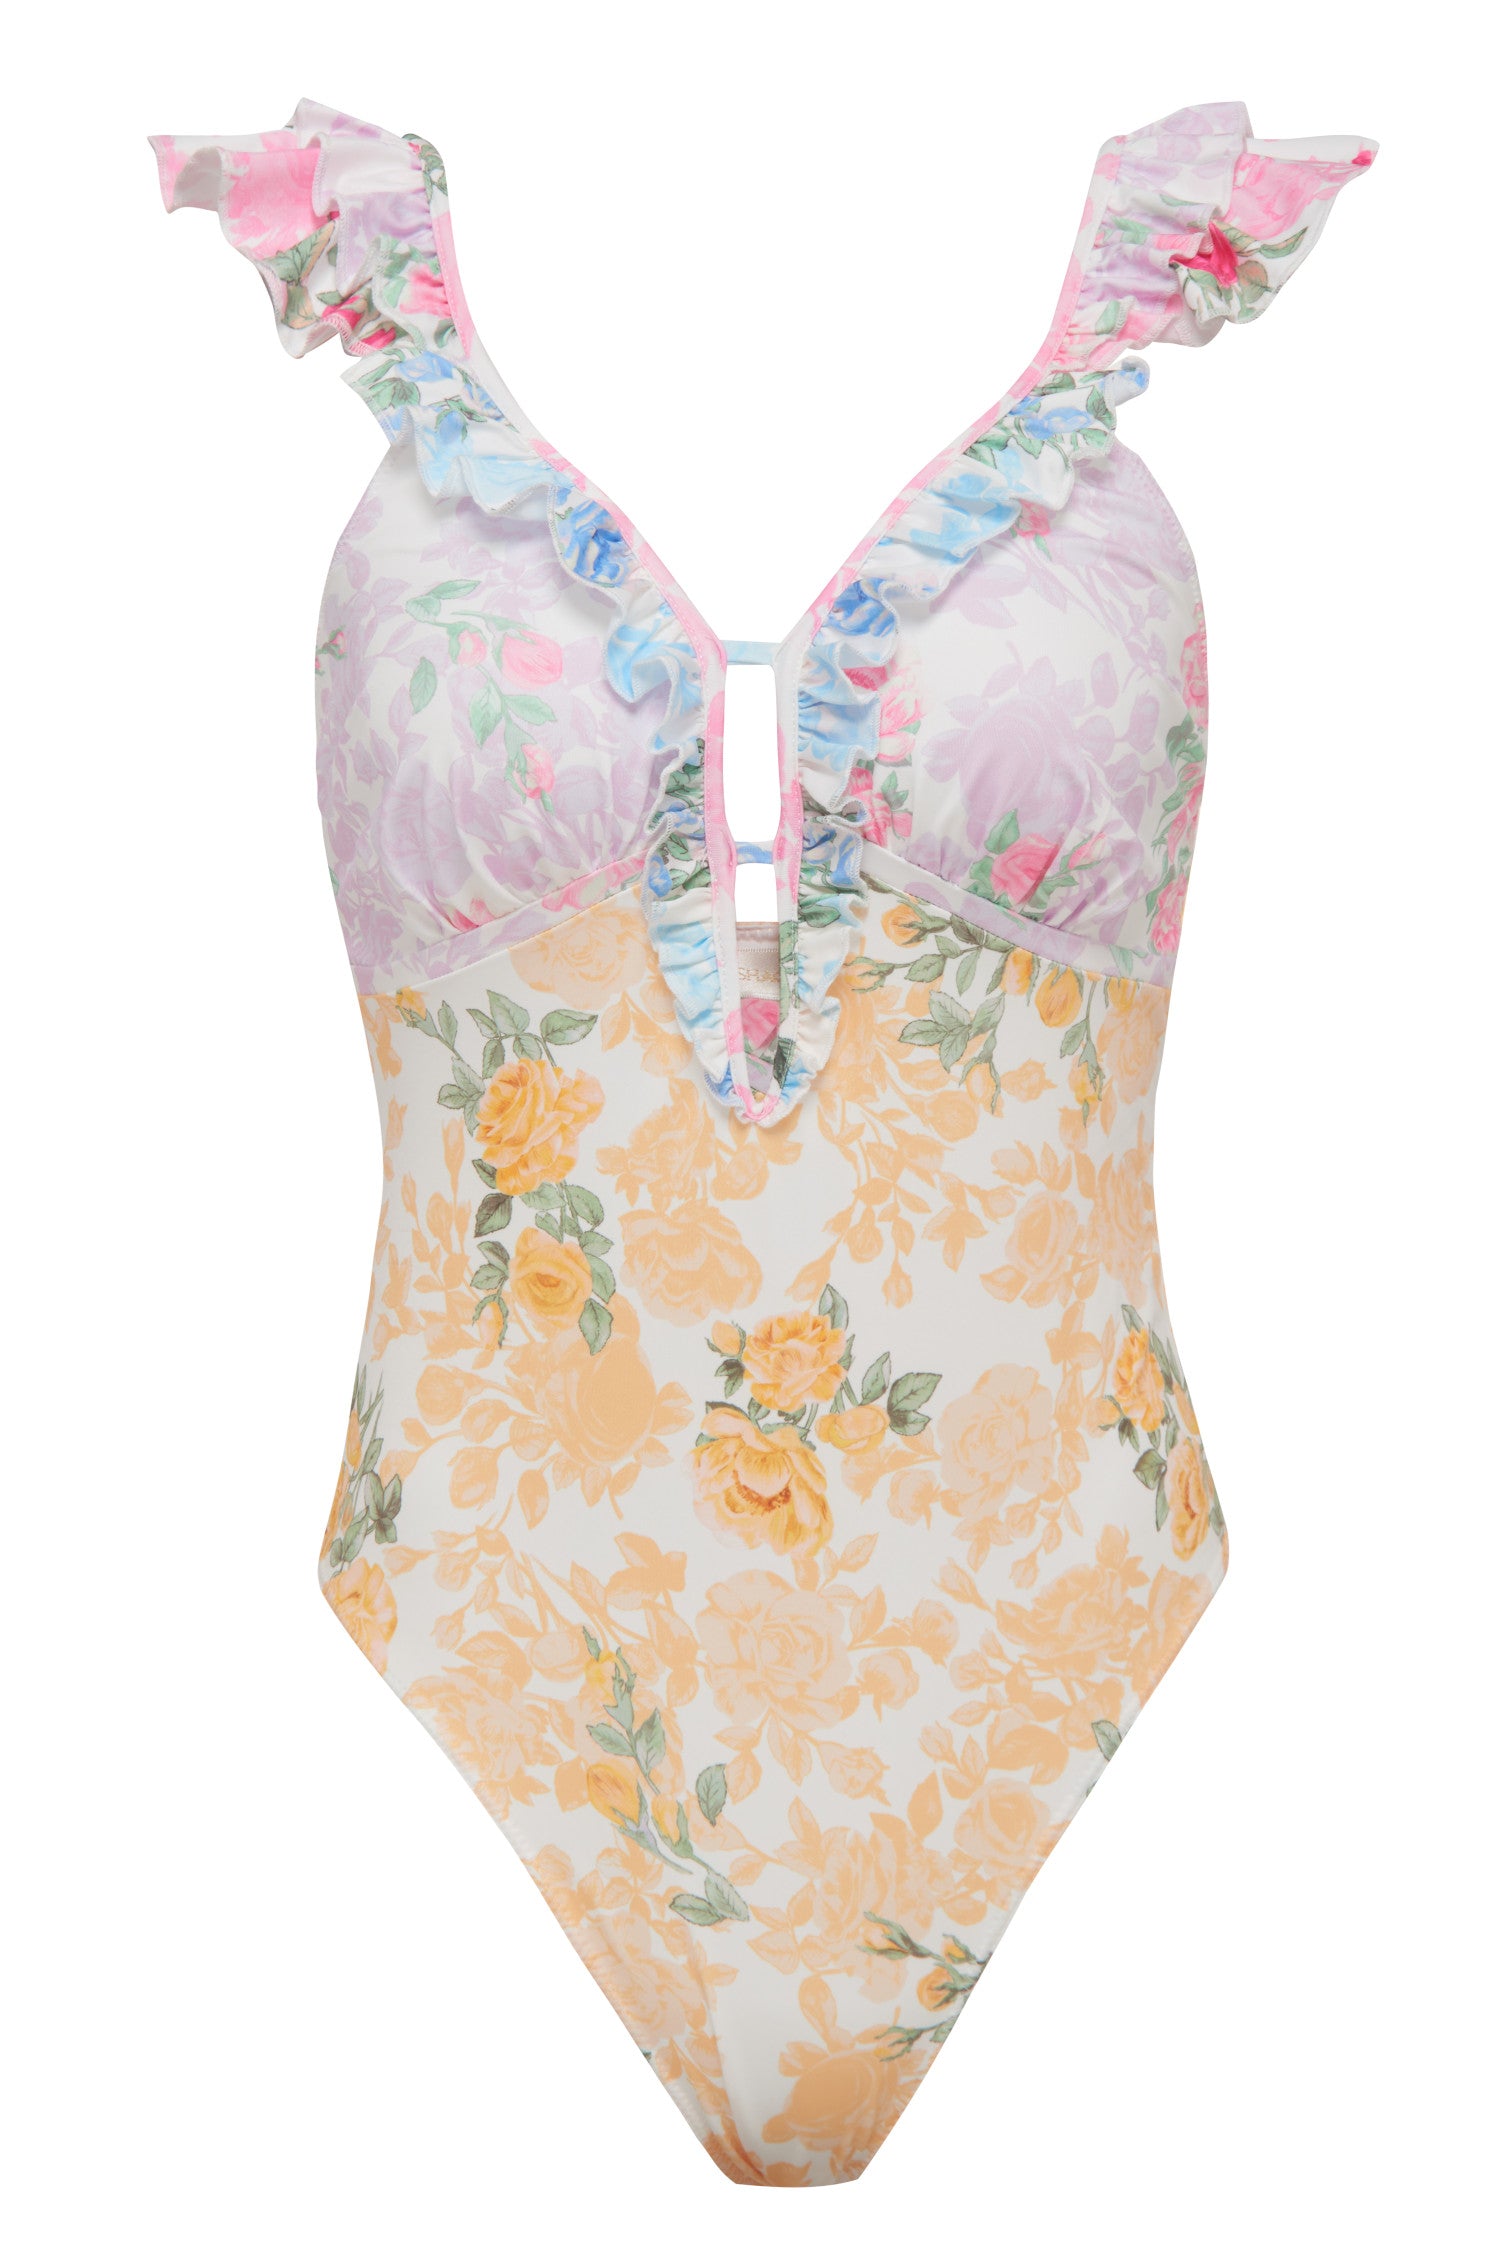 Floral ruffle one piece with keyhole center.